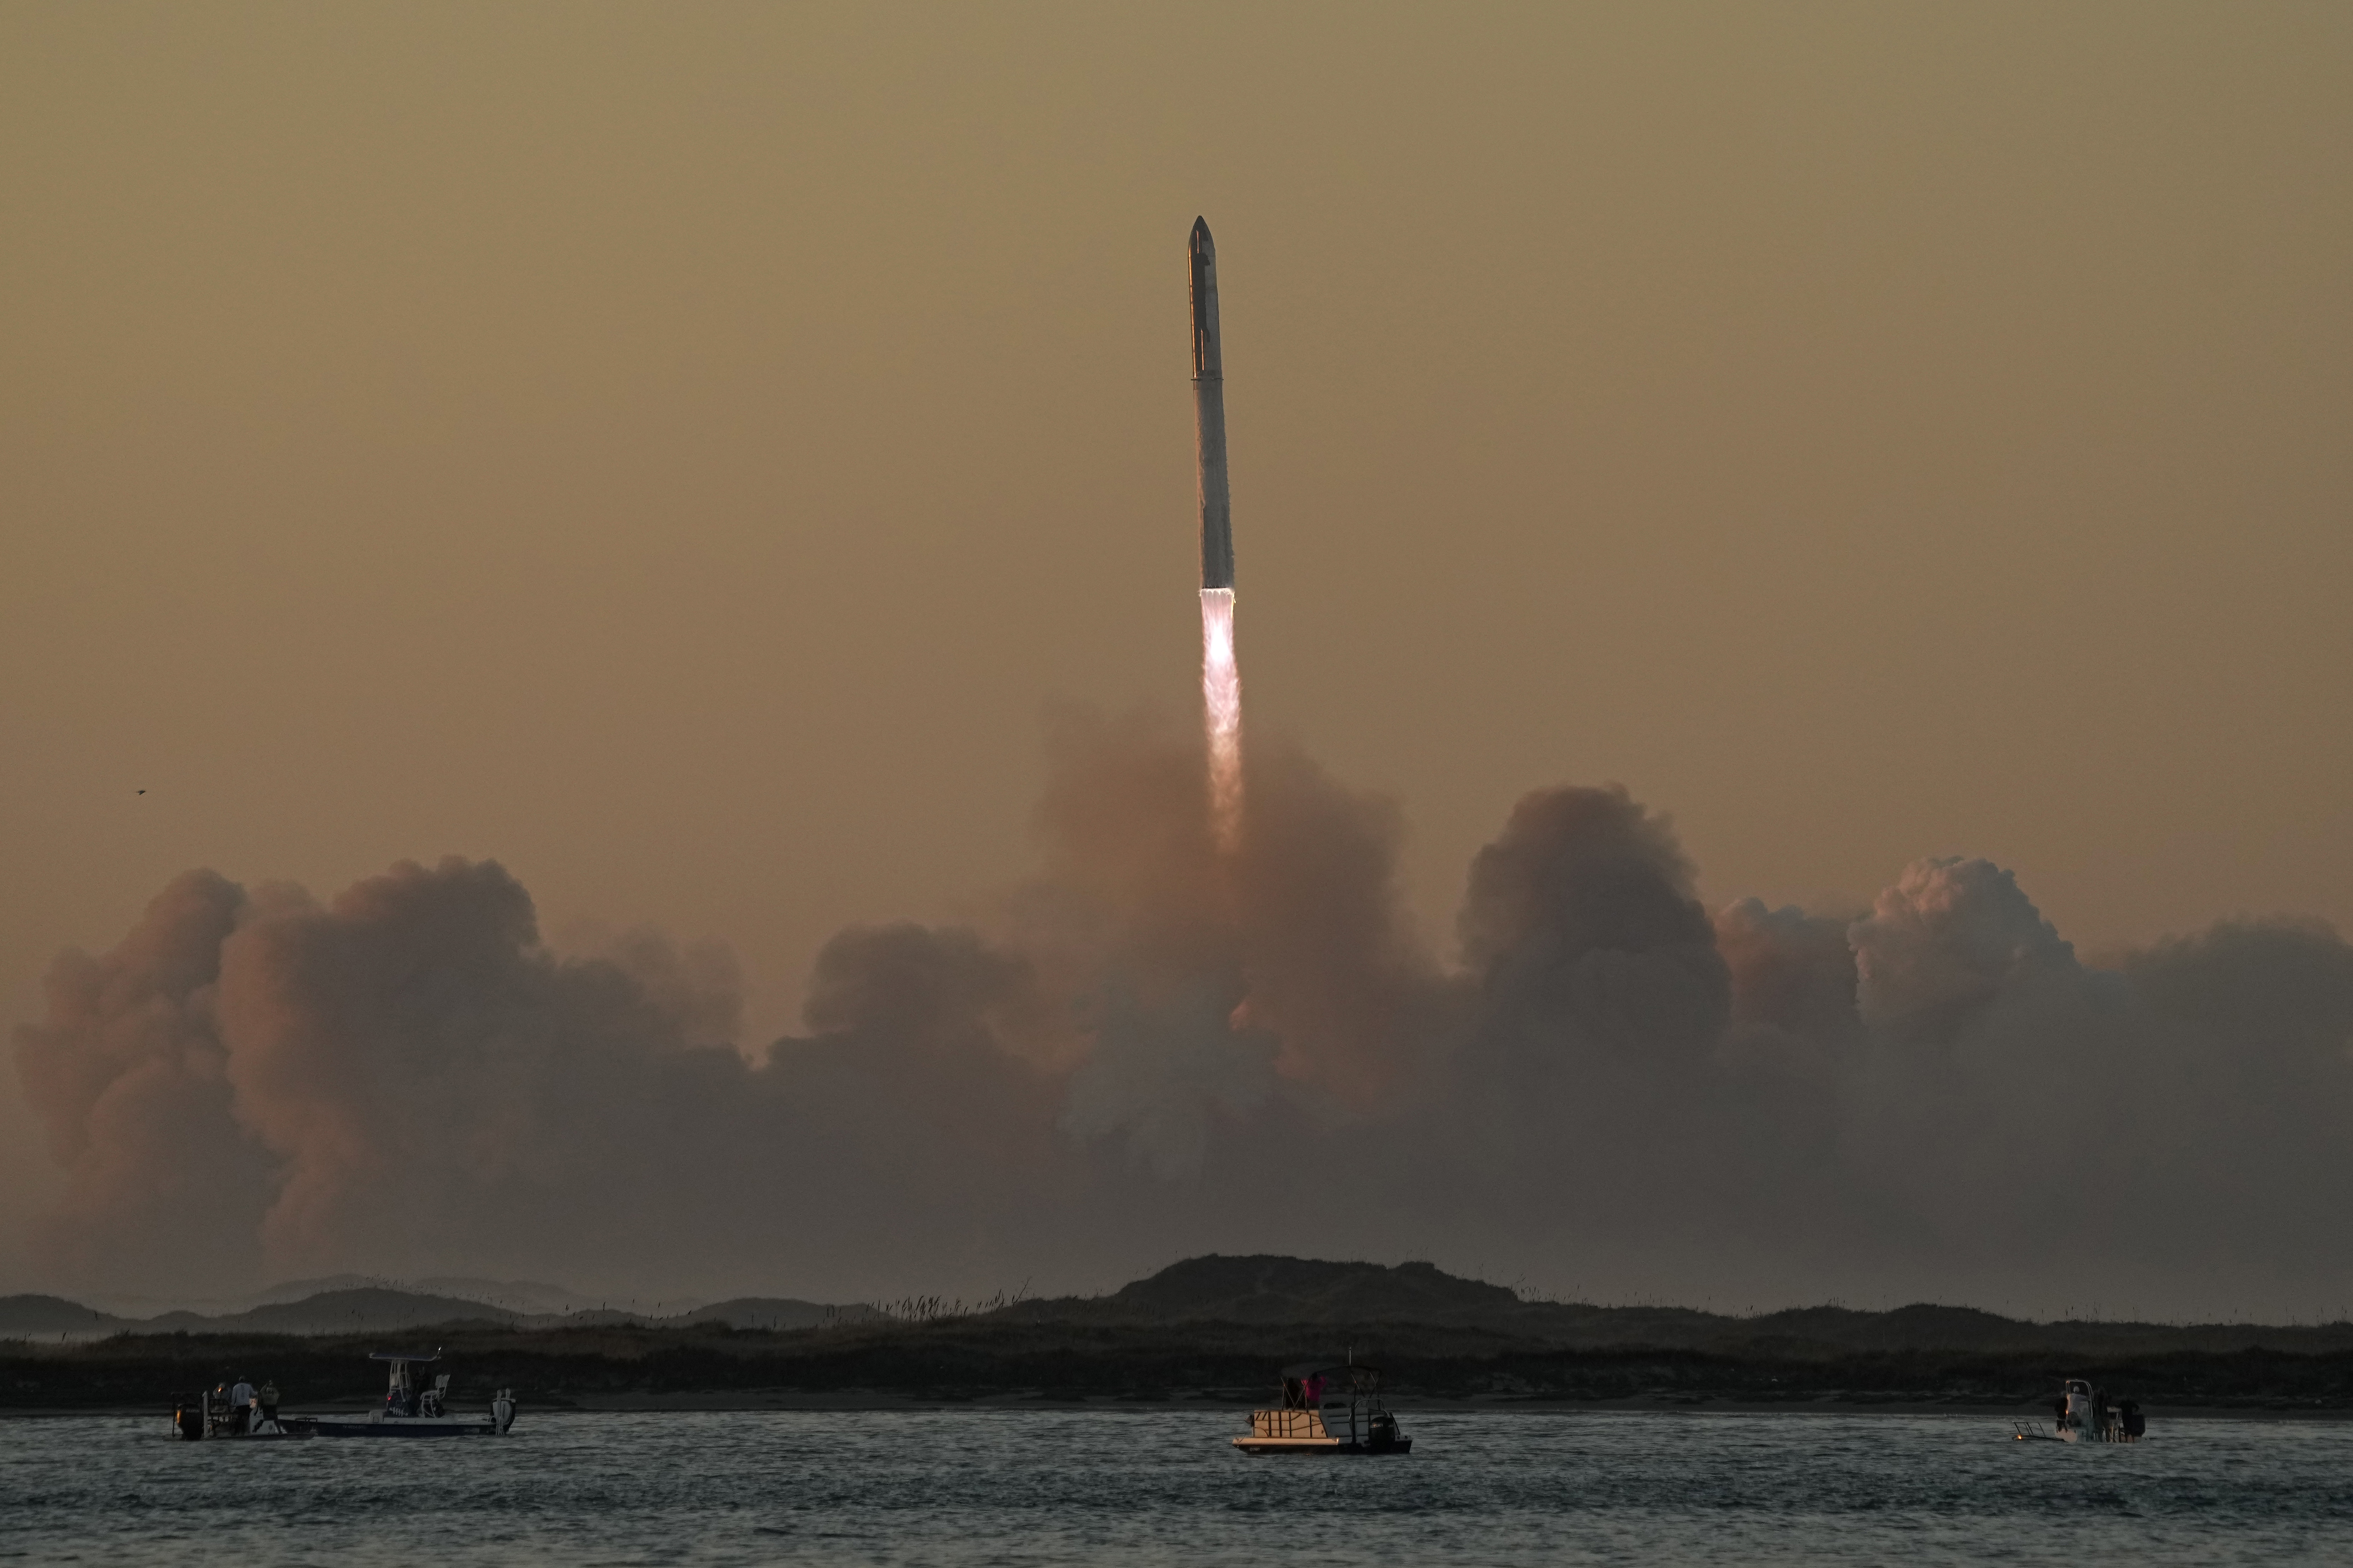 Elon Musk's SpaceX Starship rocket and spacecraft lost in second test  flight